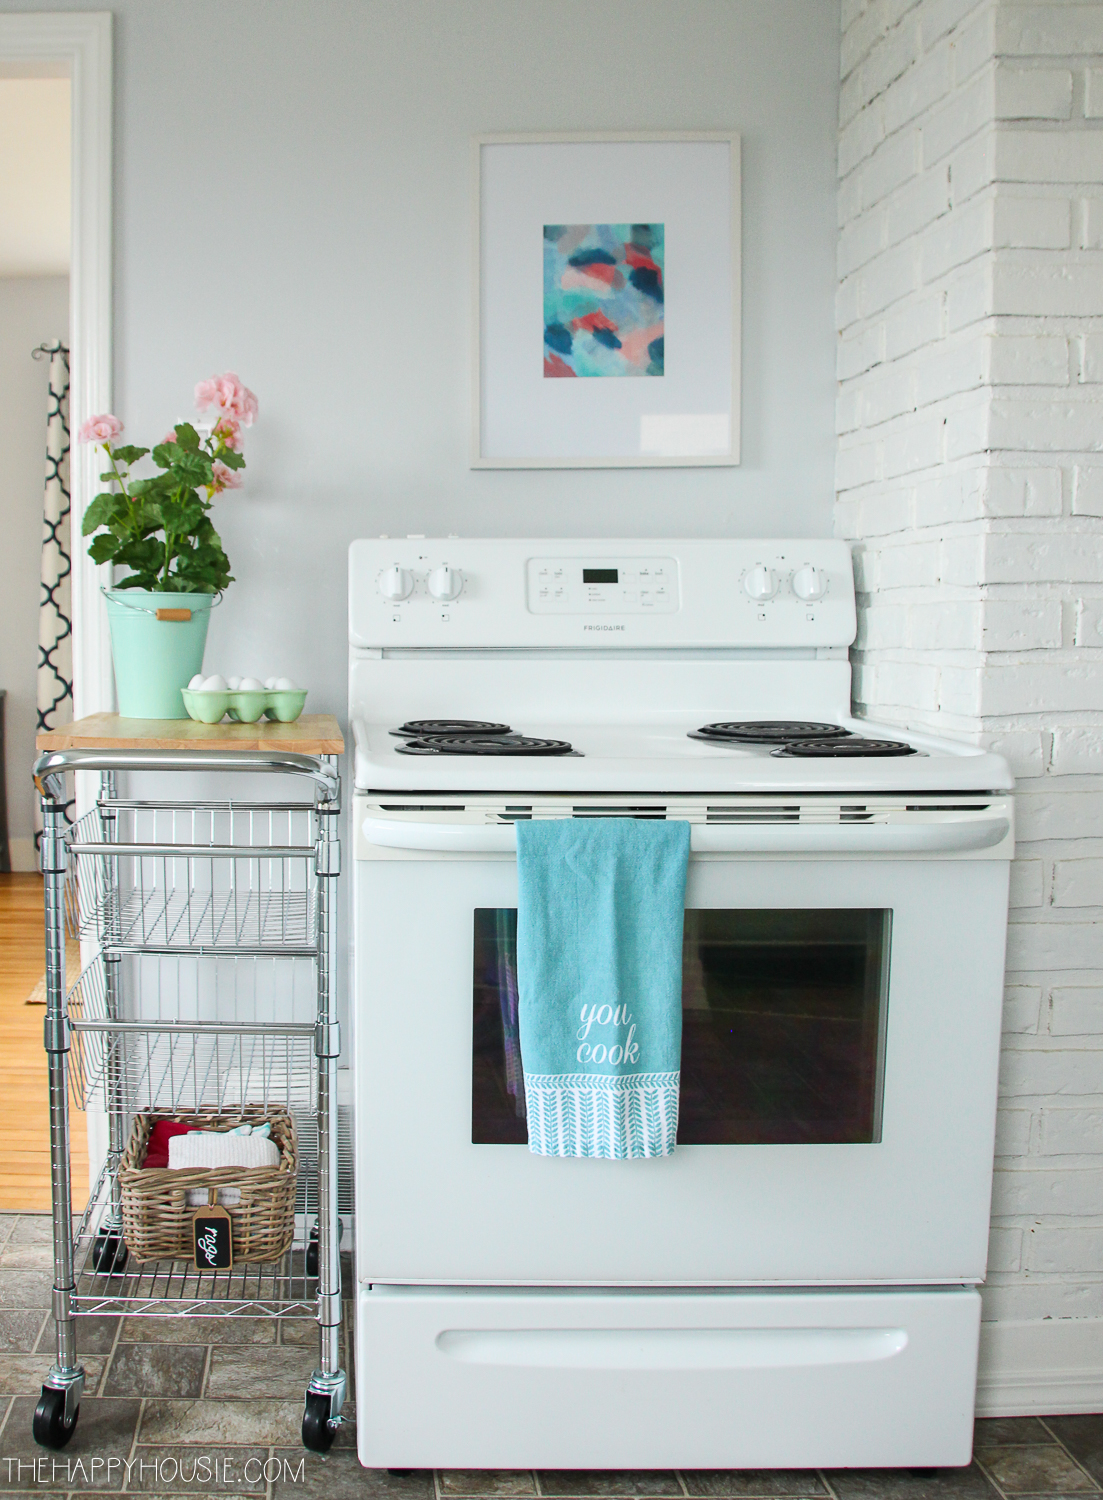 A white stove is in the corner of the kitchen.